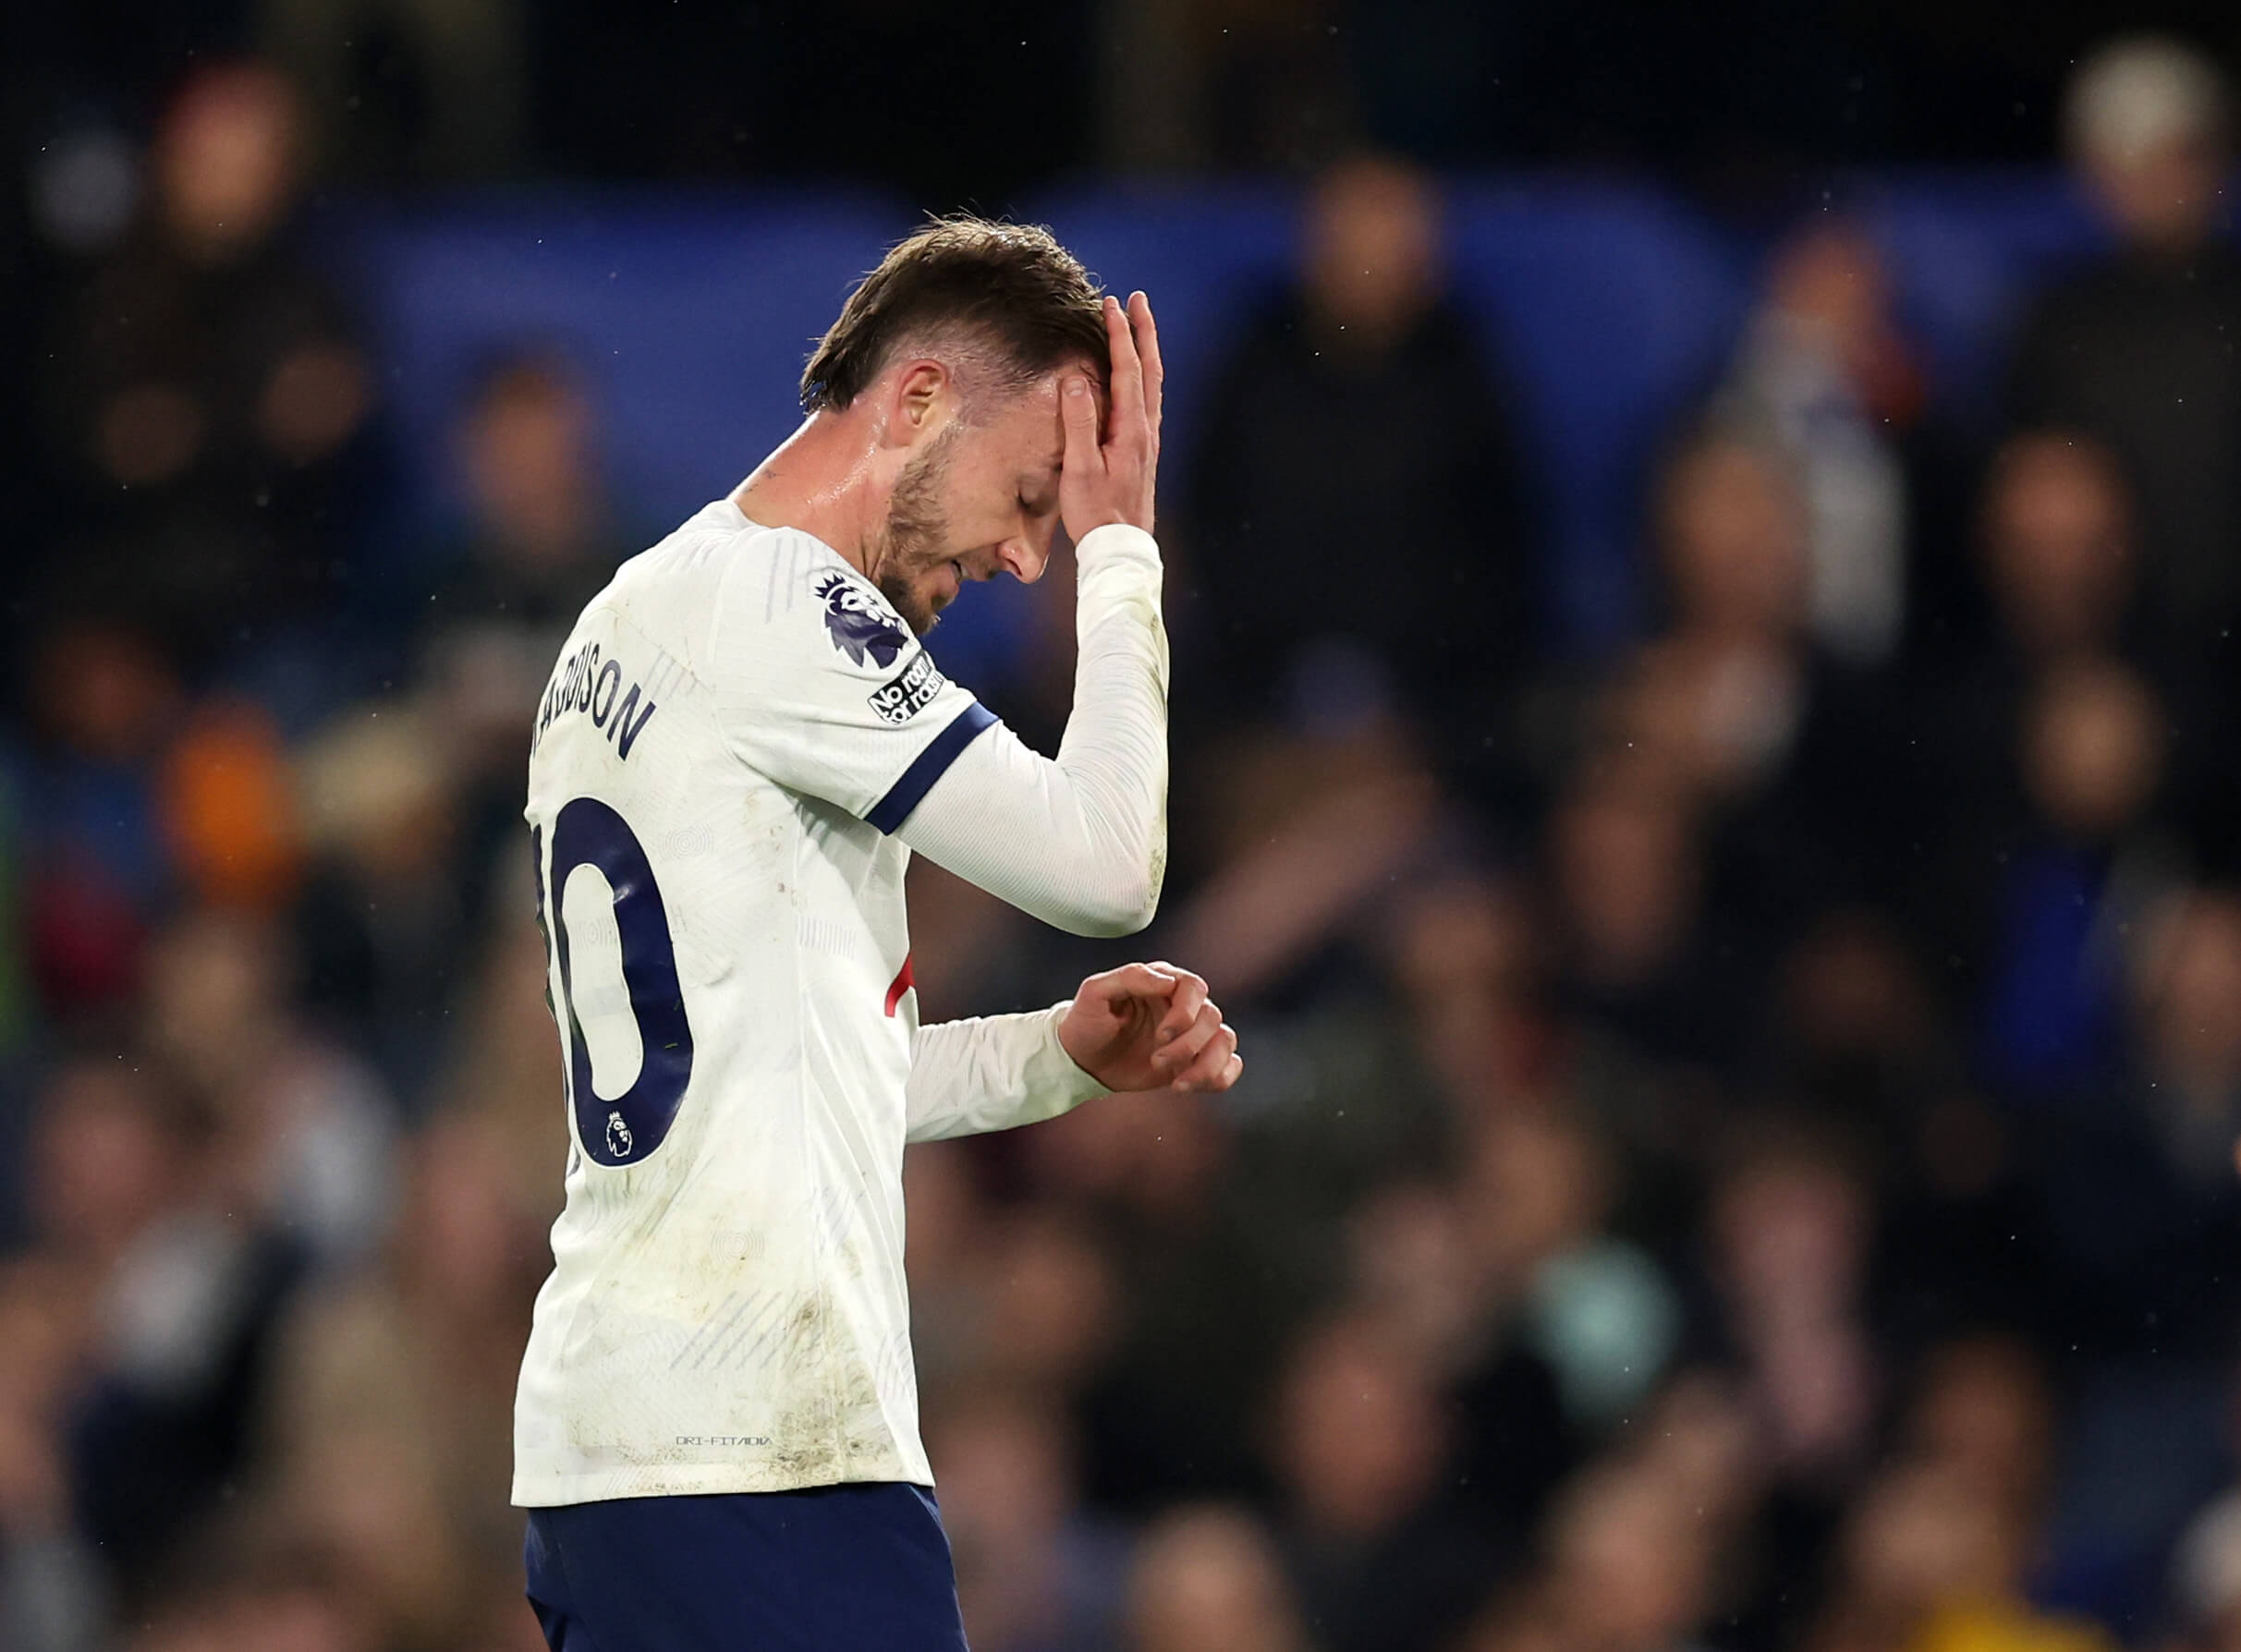 Tottenham have hit their lowest ebb under Postecoglou - so what now?